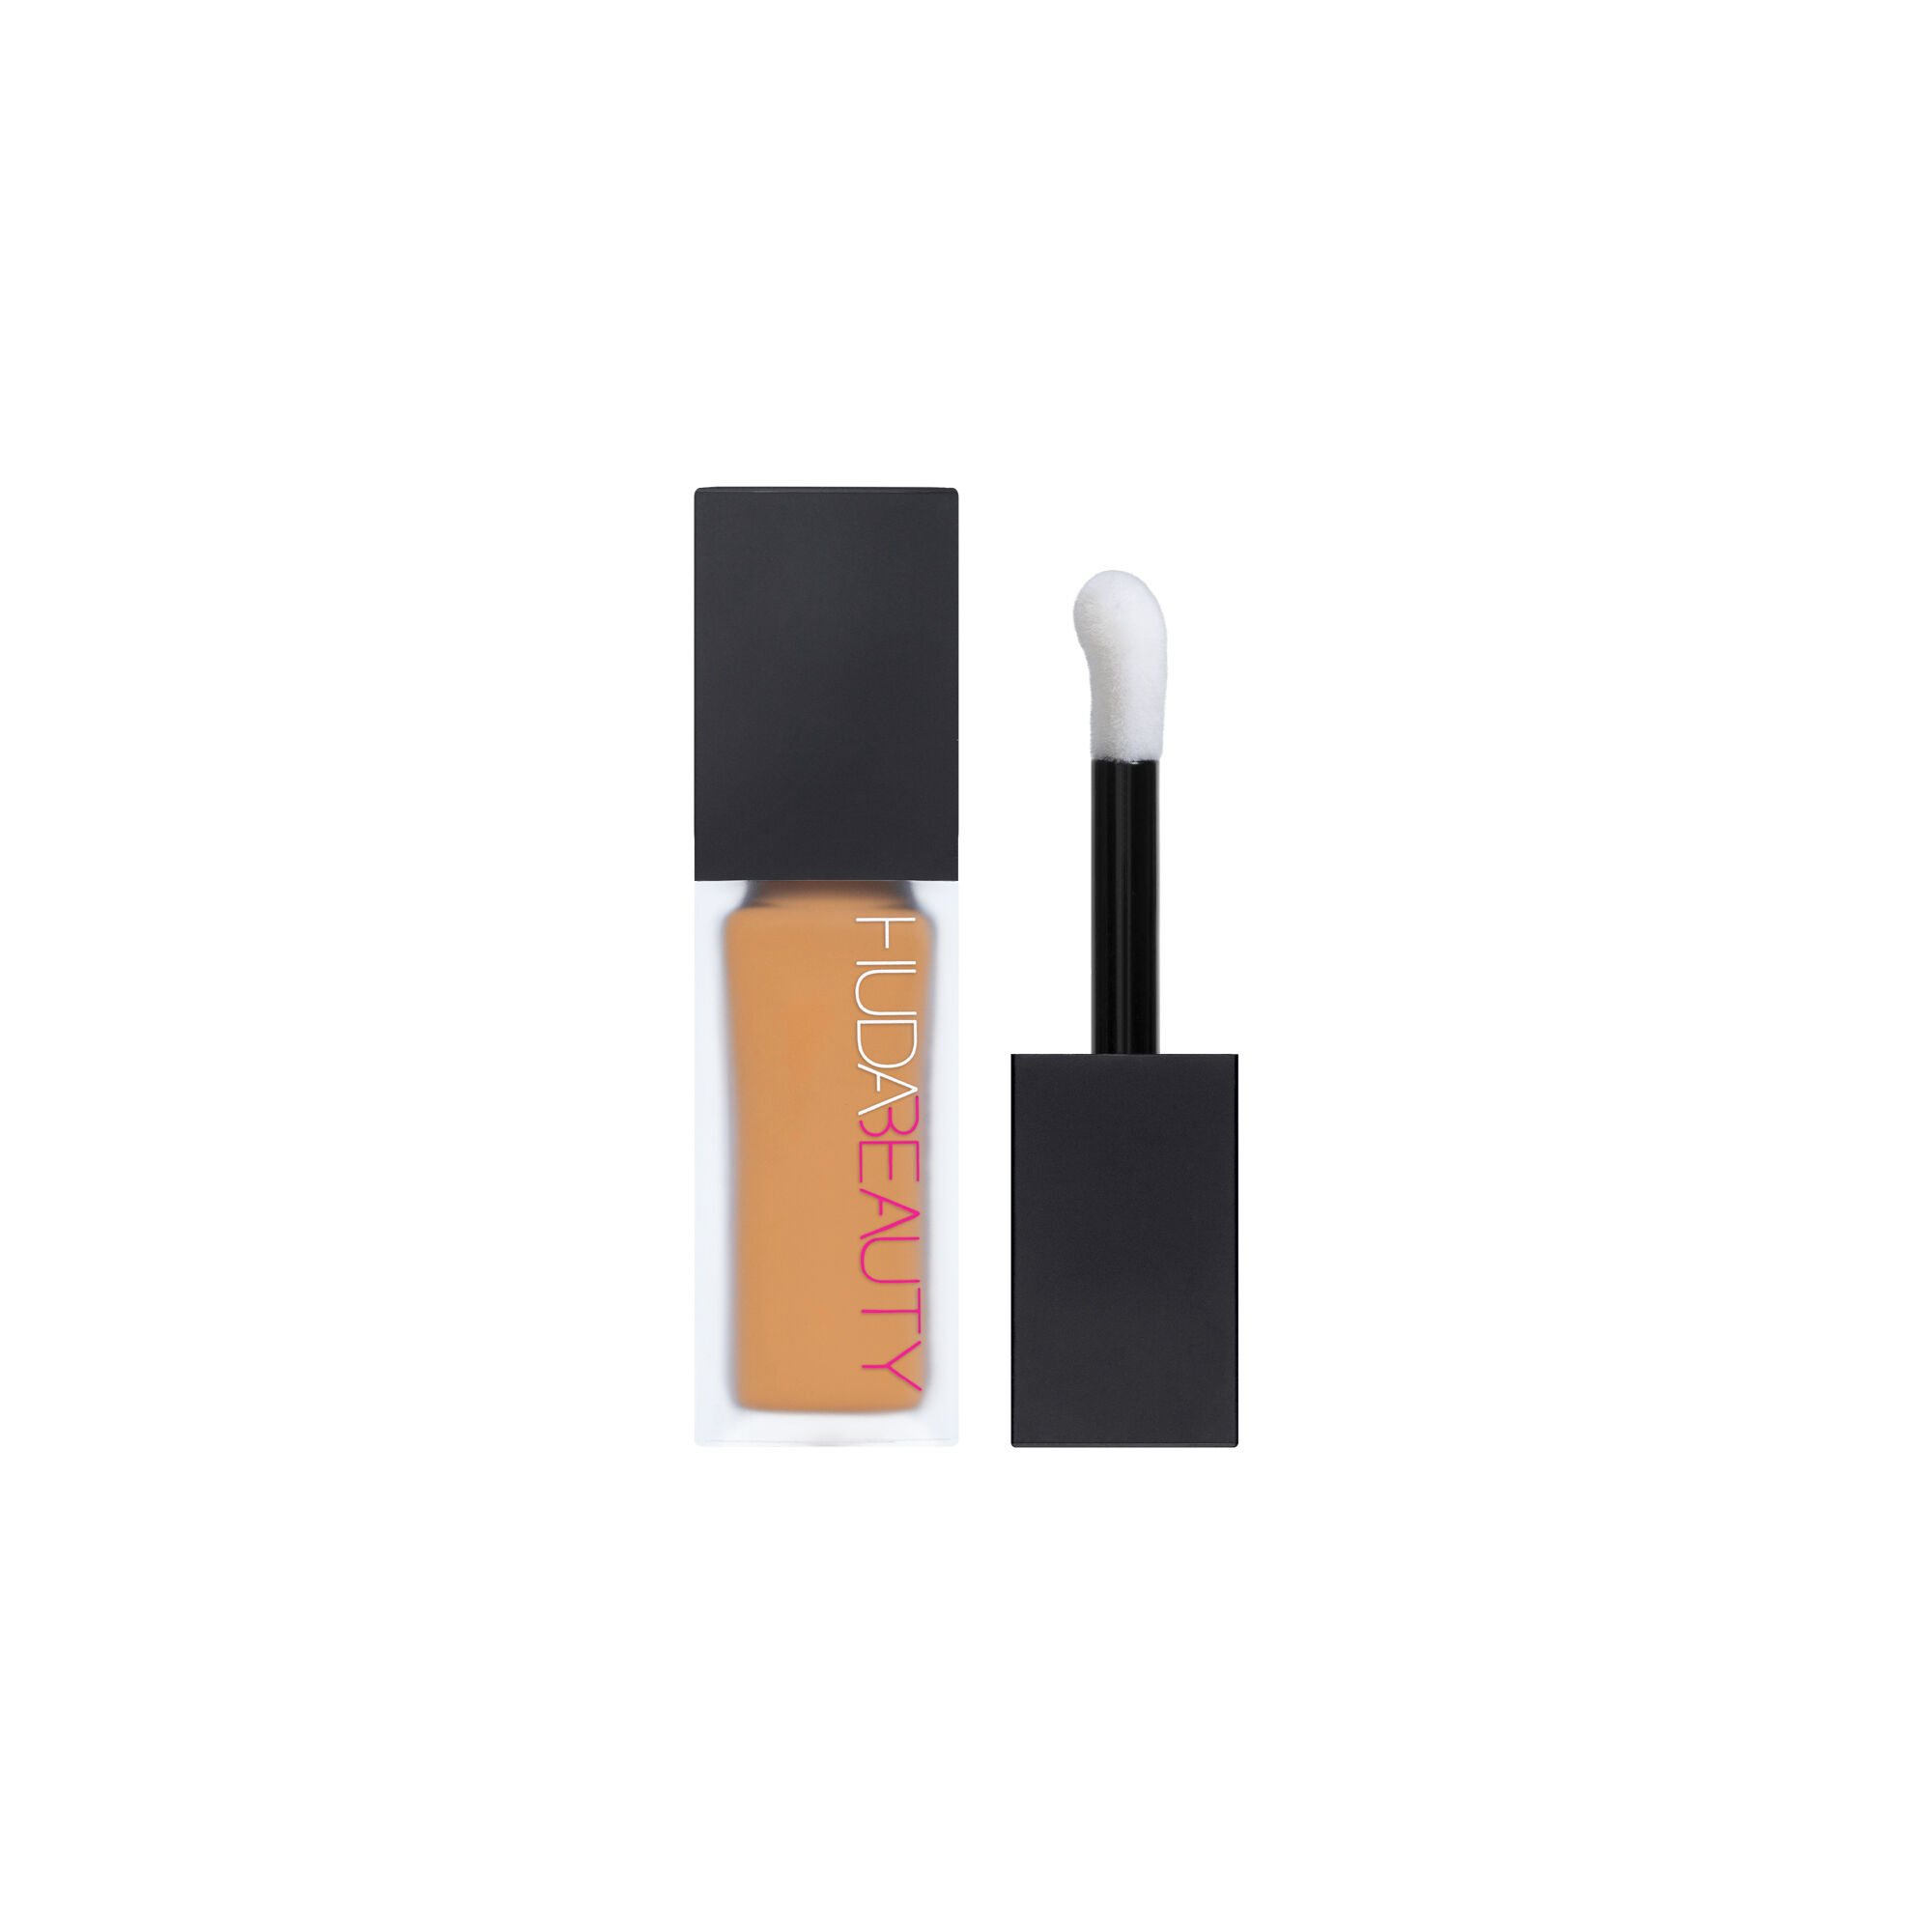 Huda Beauty Faux Filter Concealer Candied Ginger 6.1 In Candied Ginger 6.1g